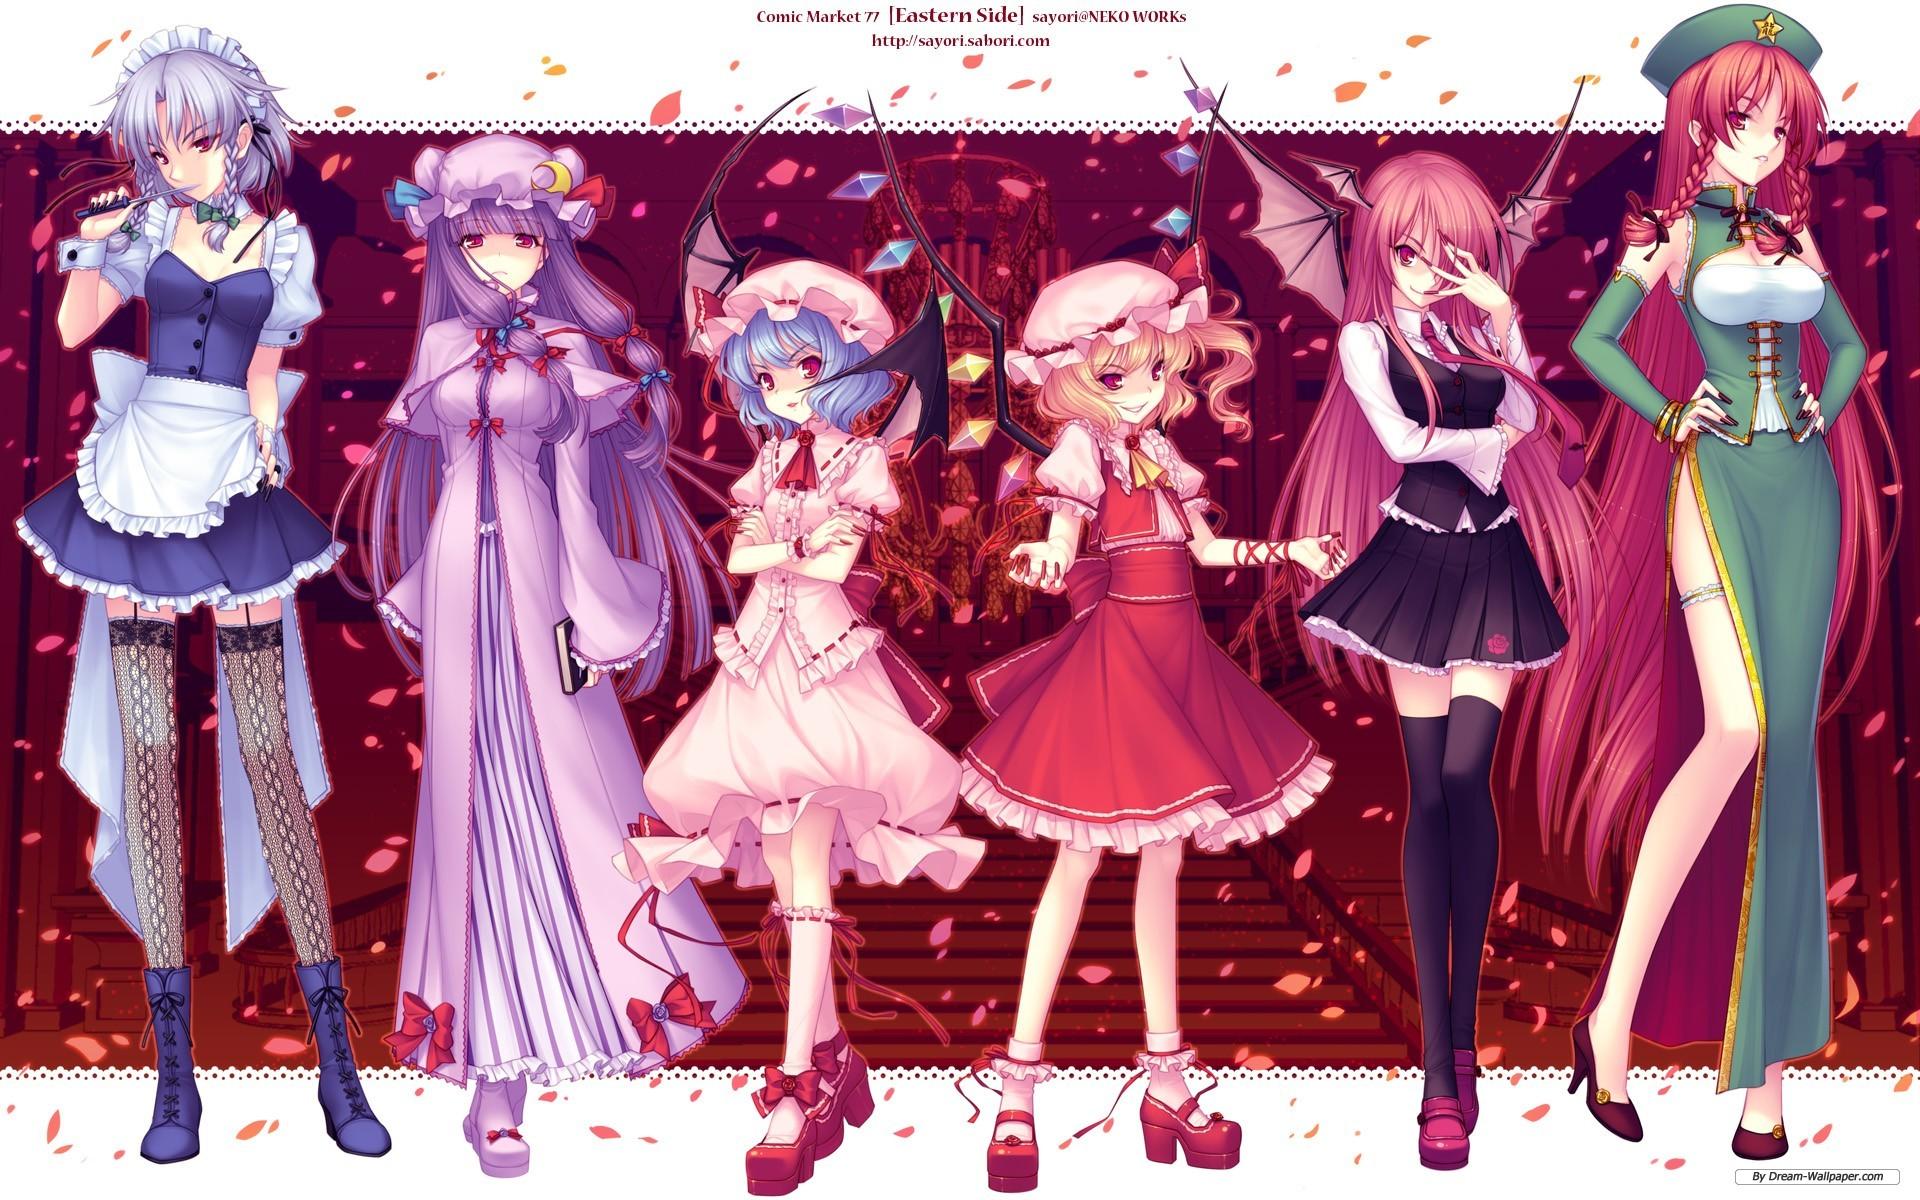 Touhou Project Background → Anime Gallery